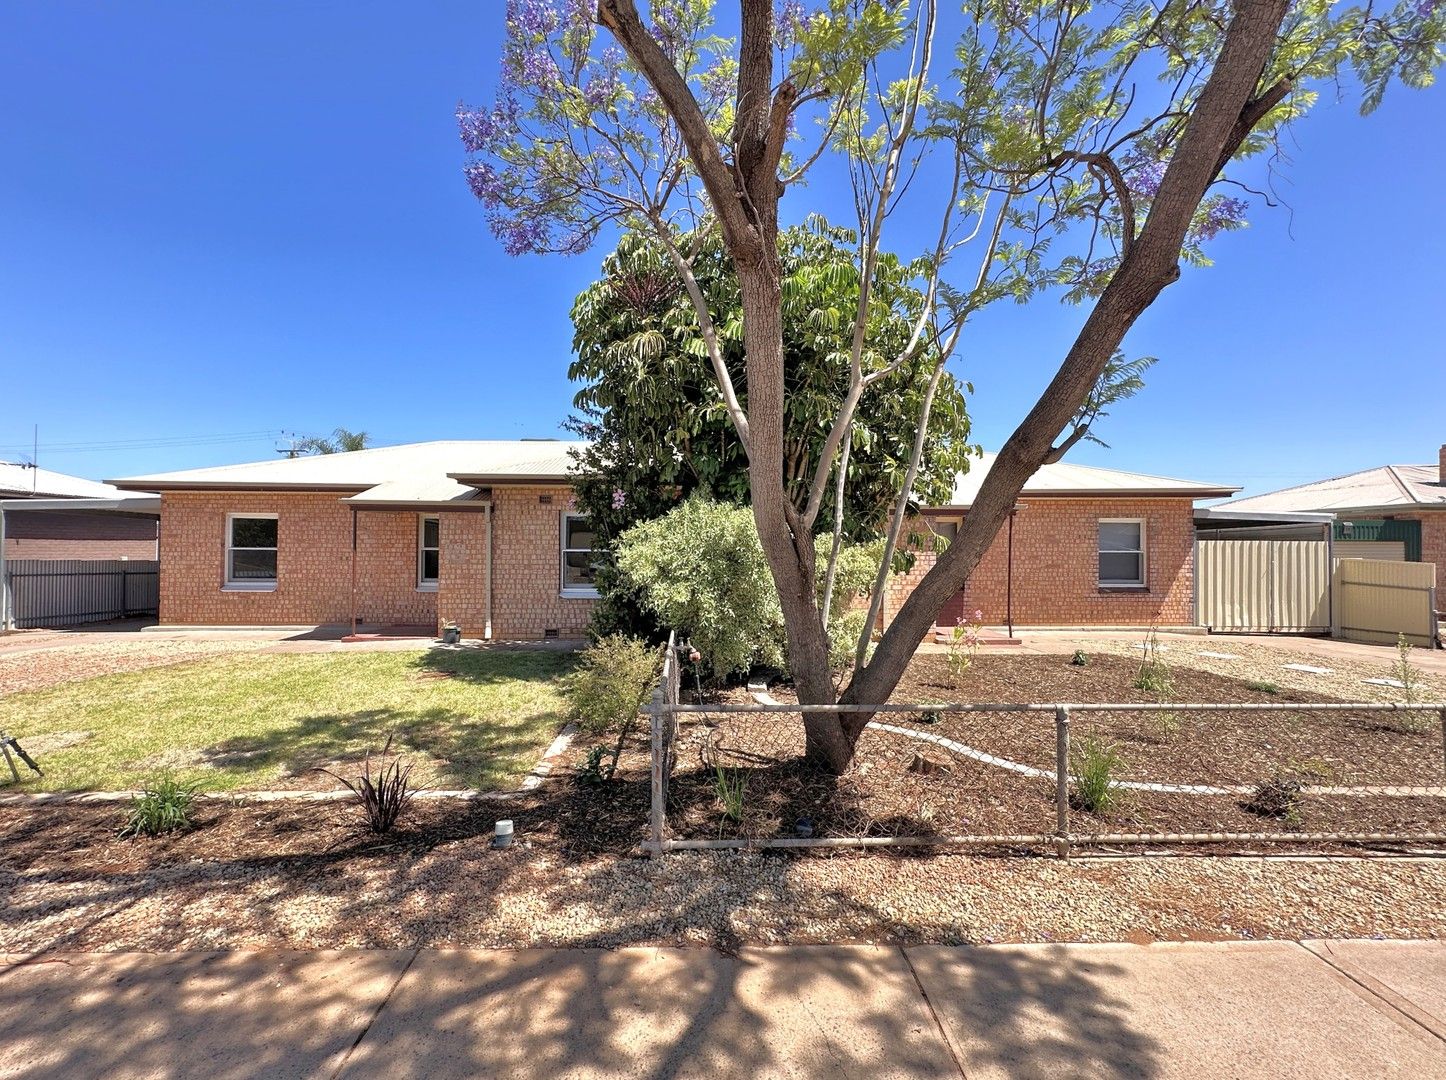 25-27 Gordon Street, Whyalla Norrie SA 5608, Image 0